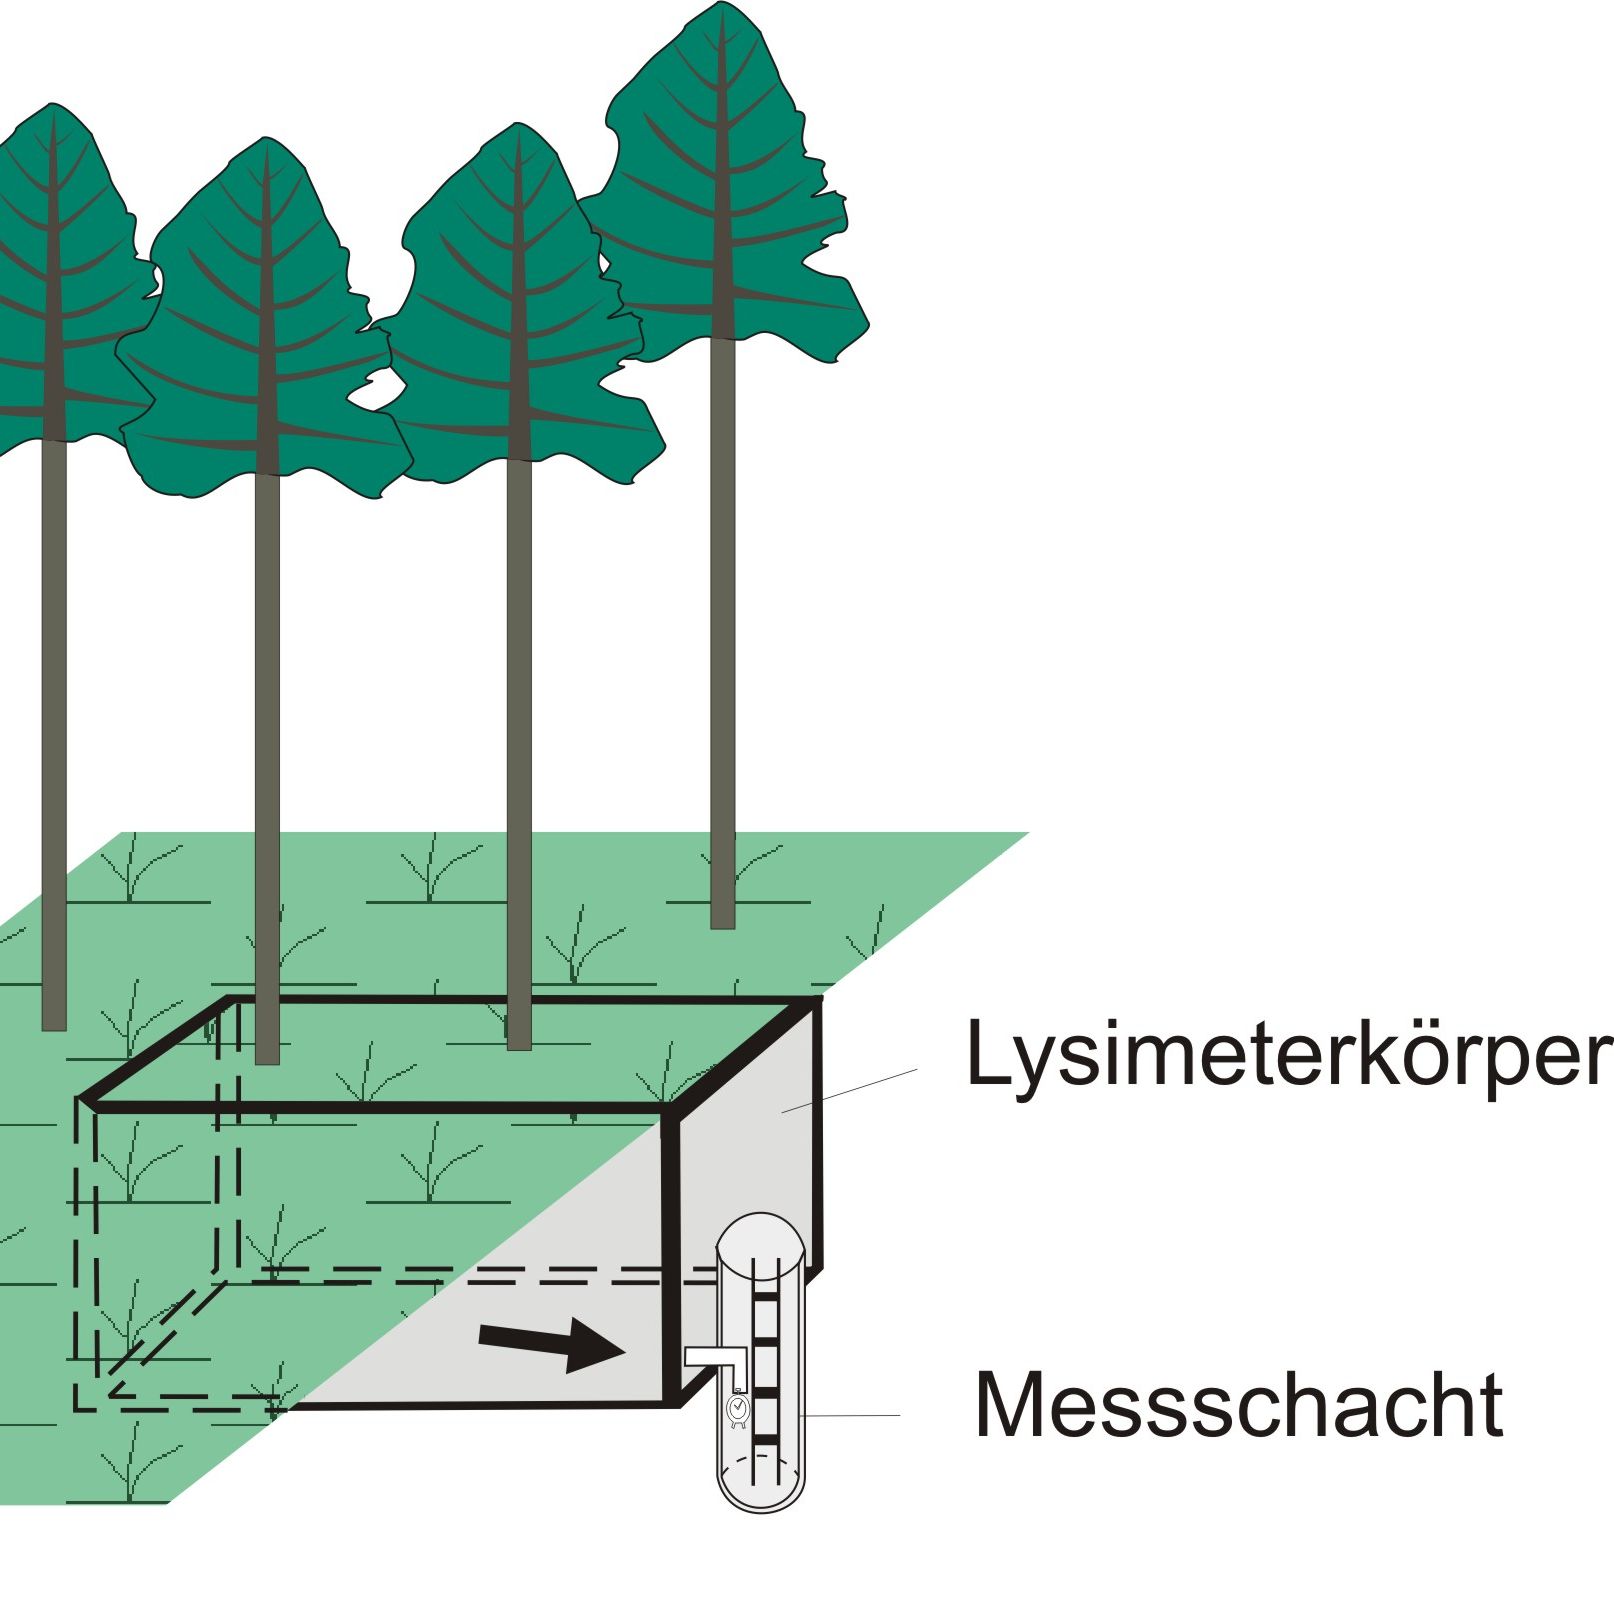 Schematic drawing of a large lysimeter overgrown with trees